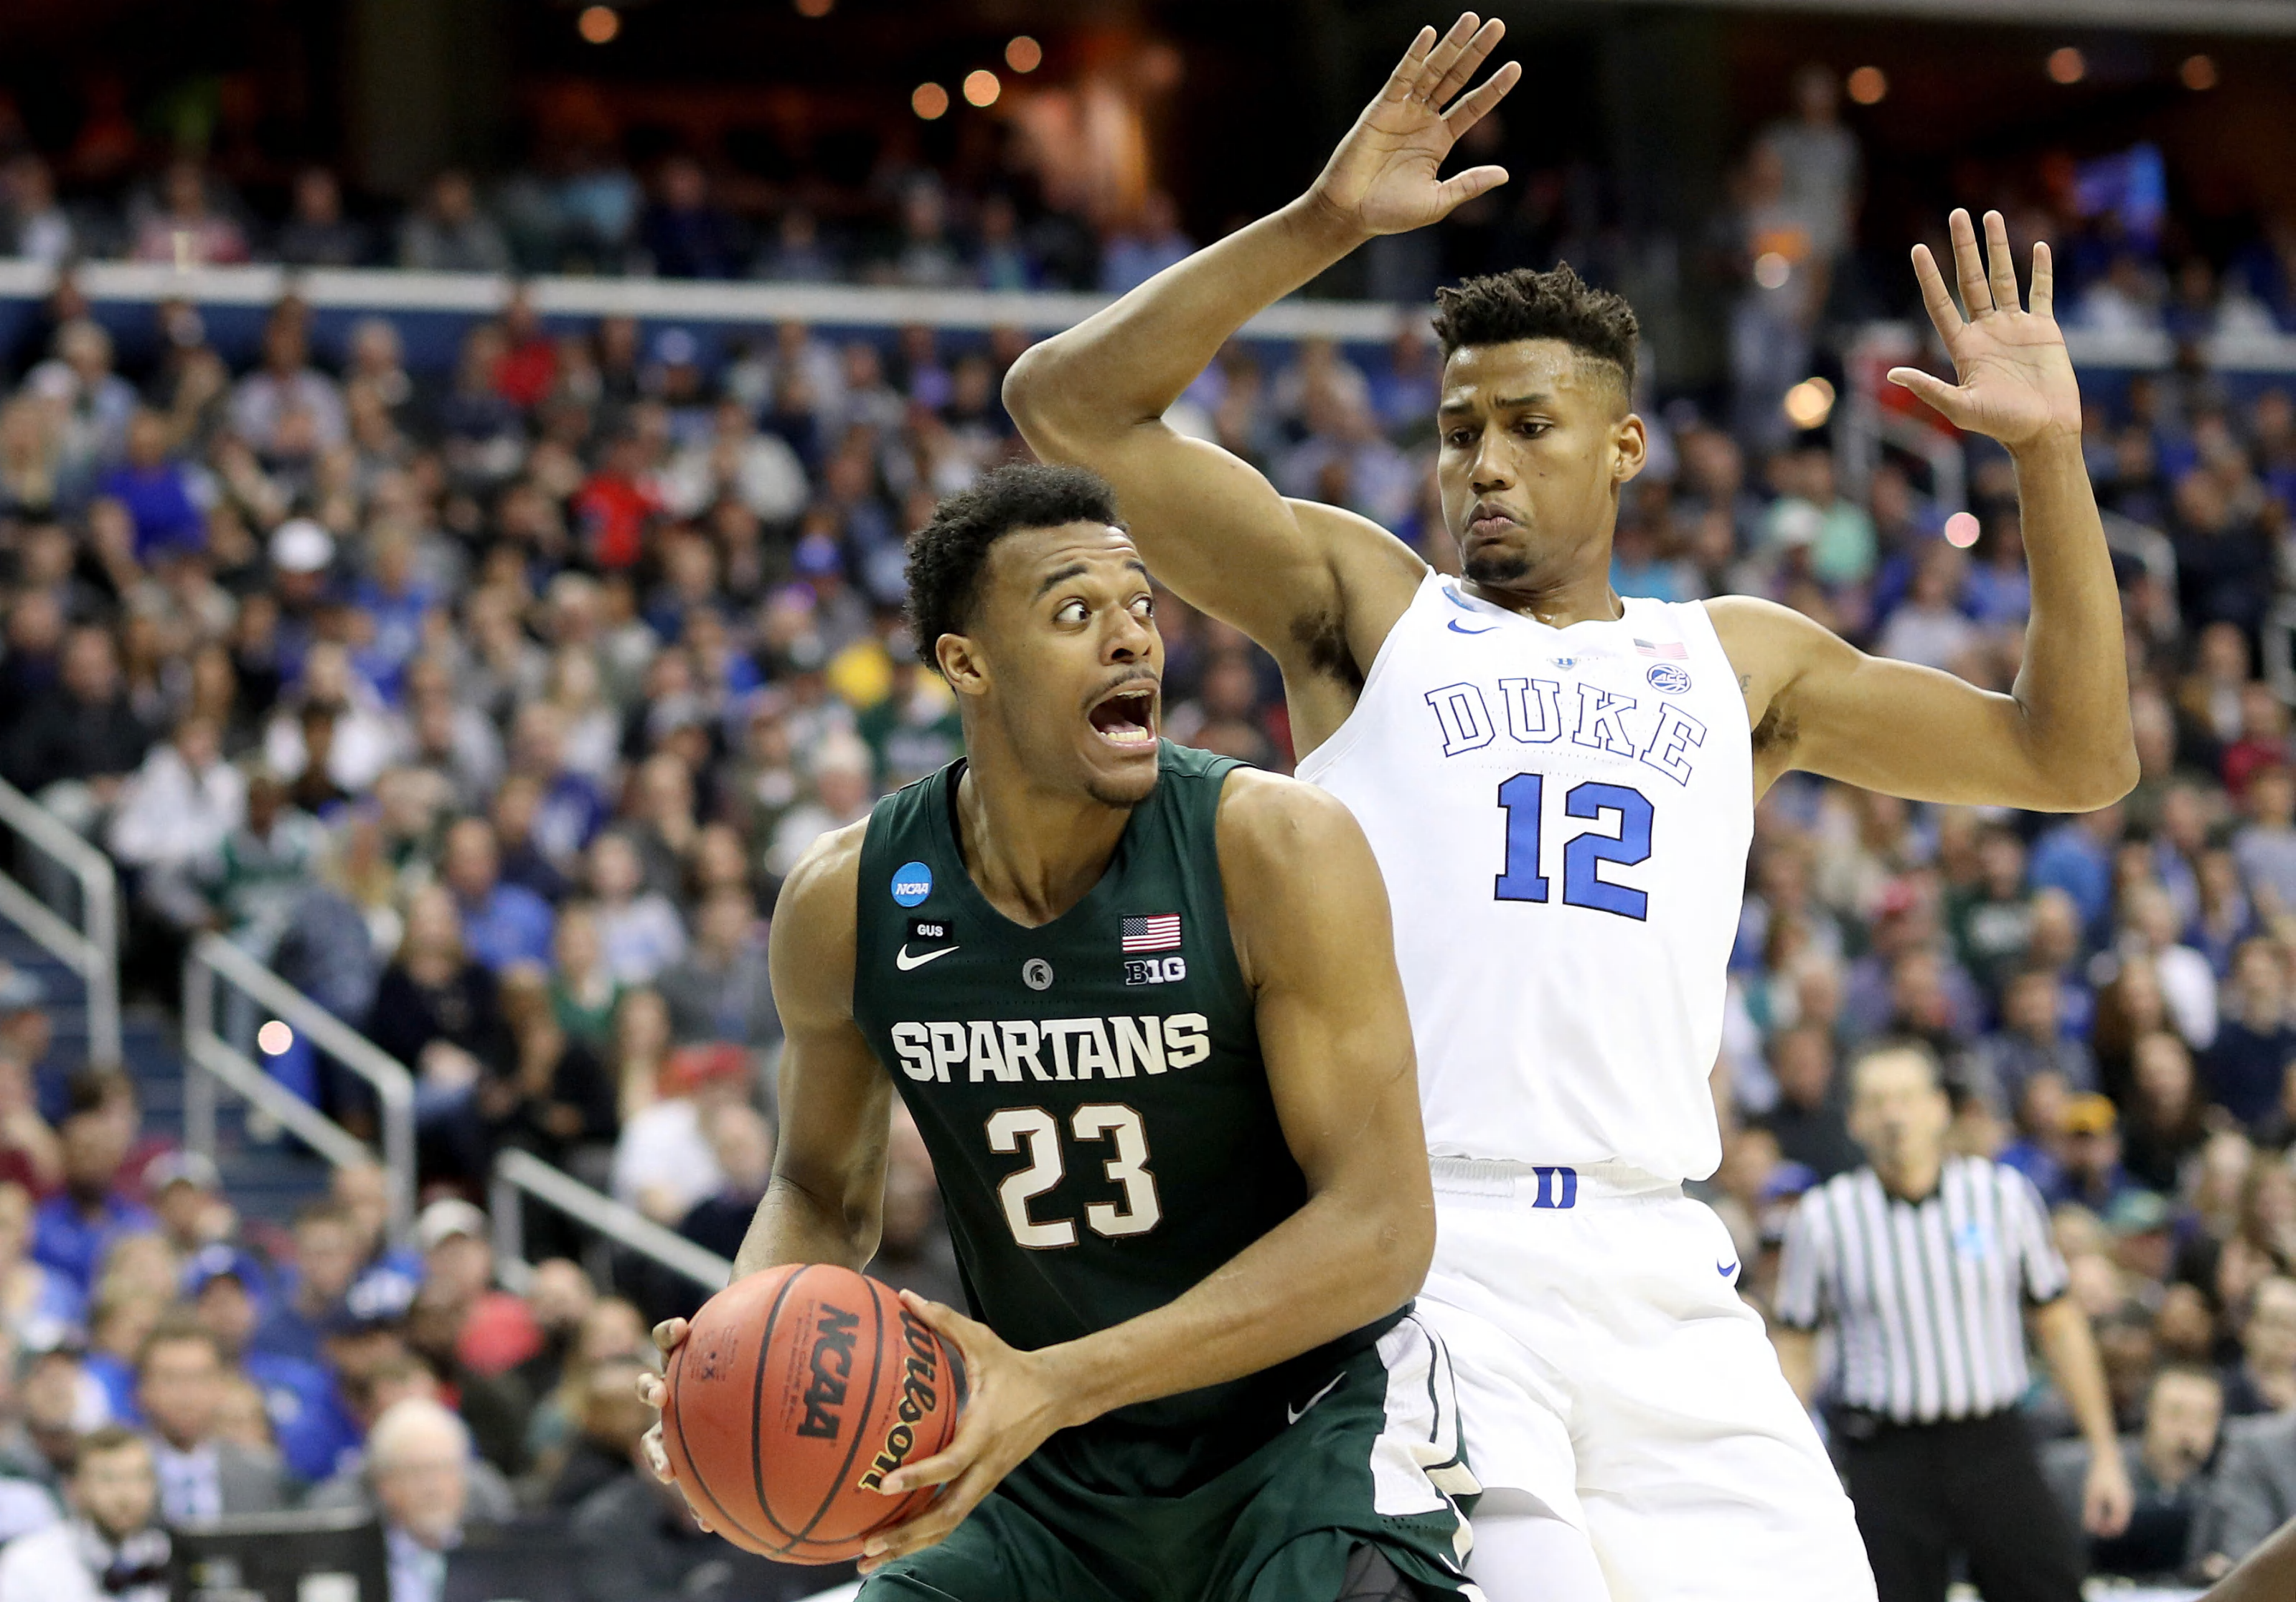 Michigan State Basketball: Game-by-game predictions for 2019-20 season